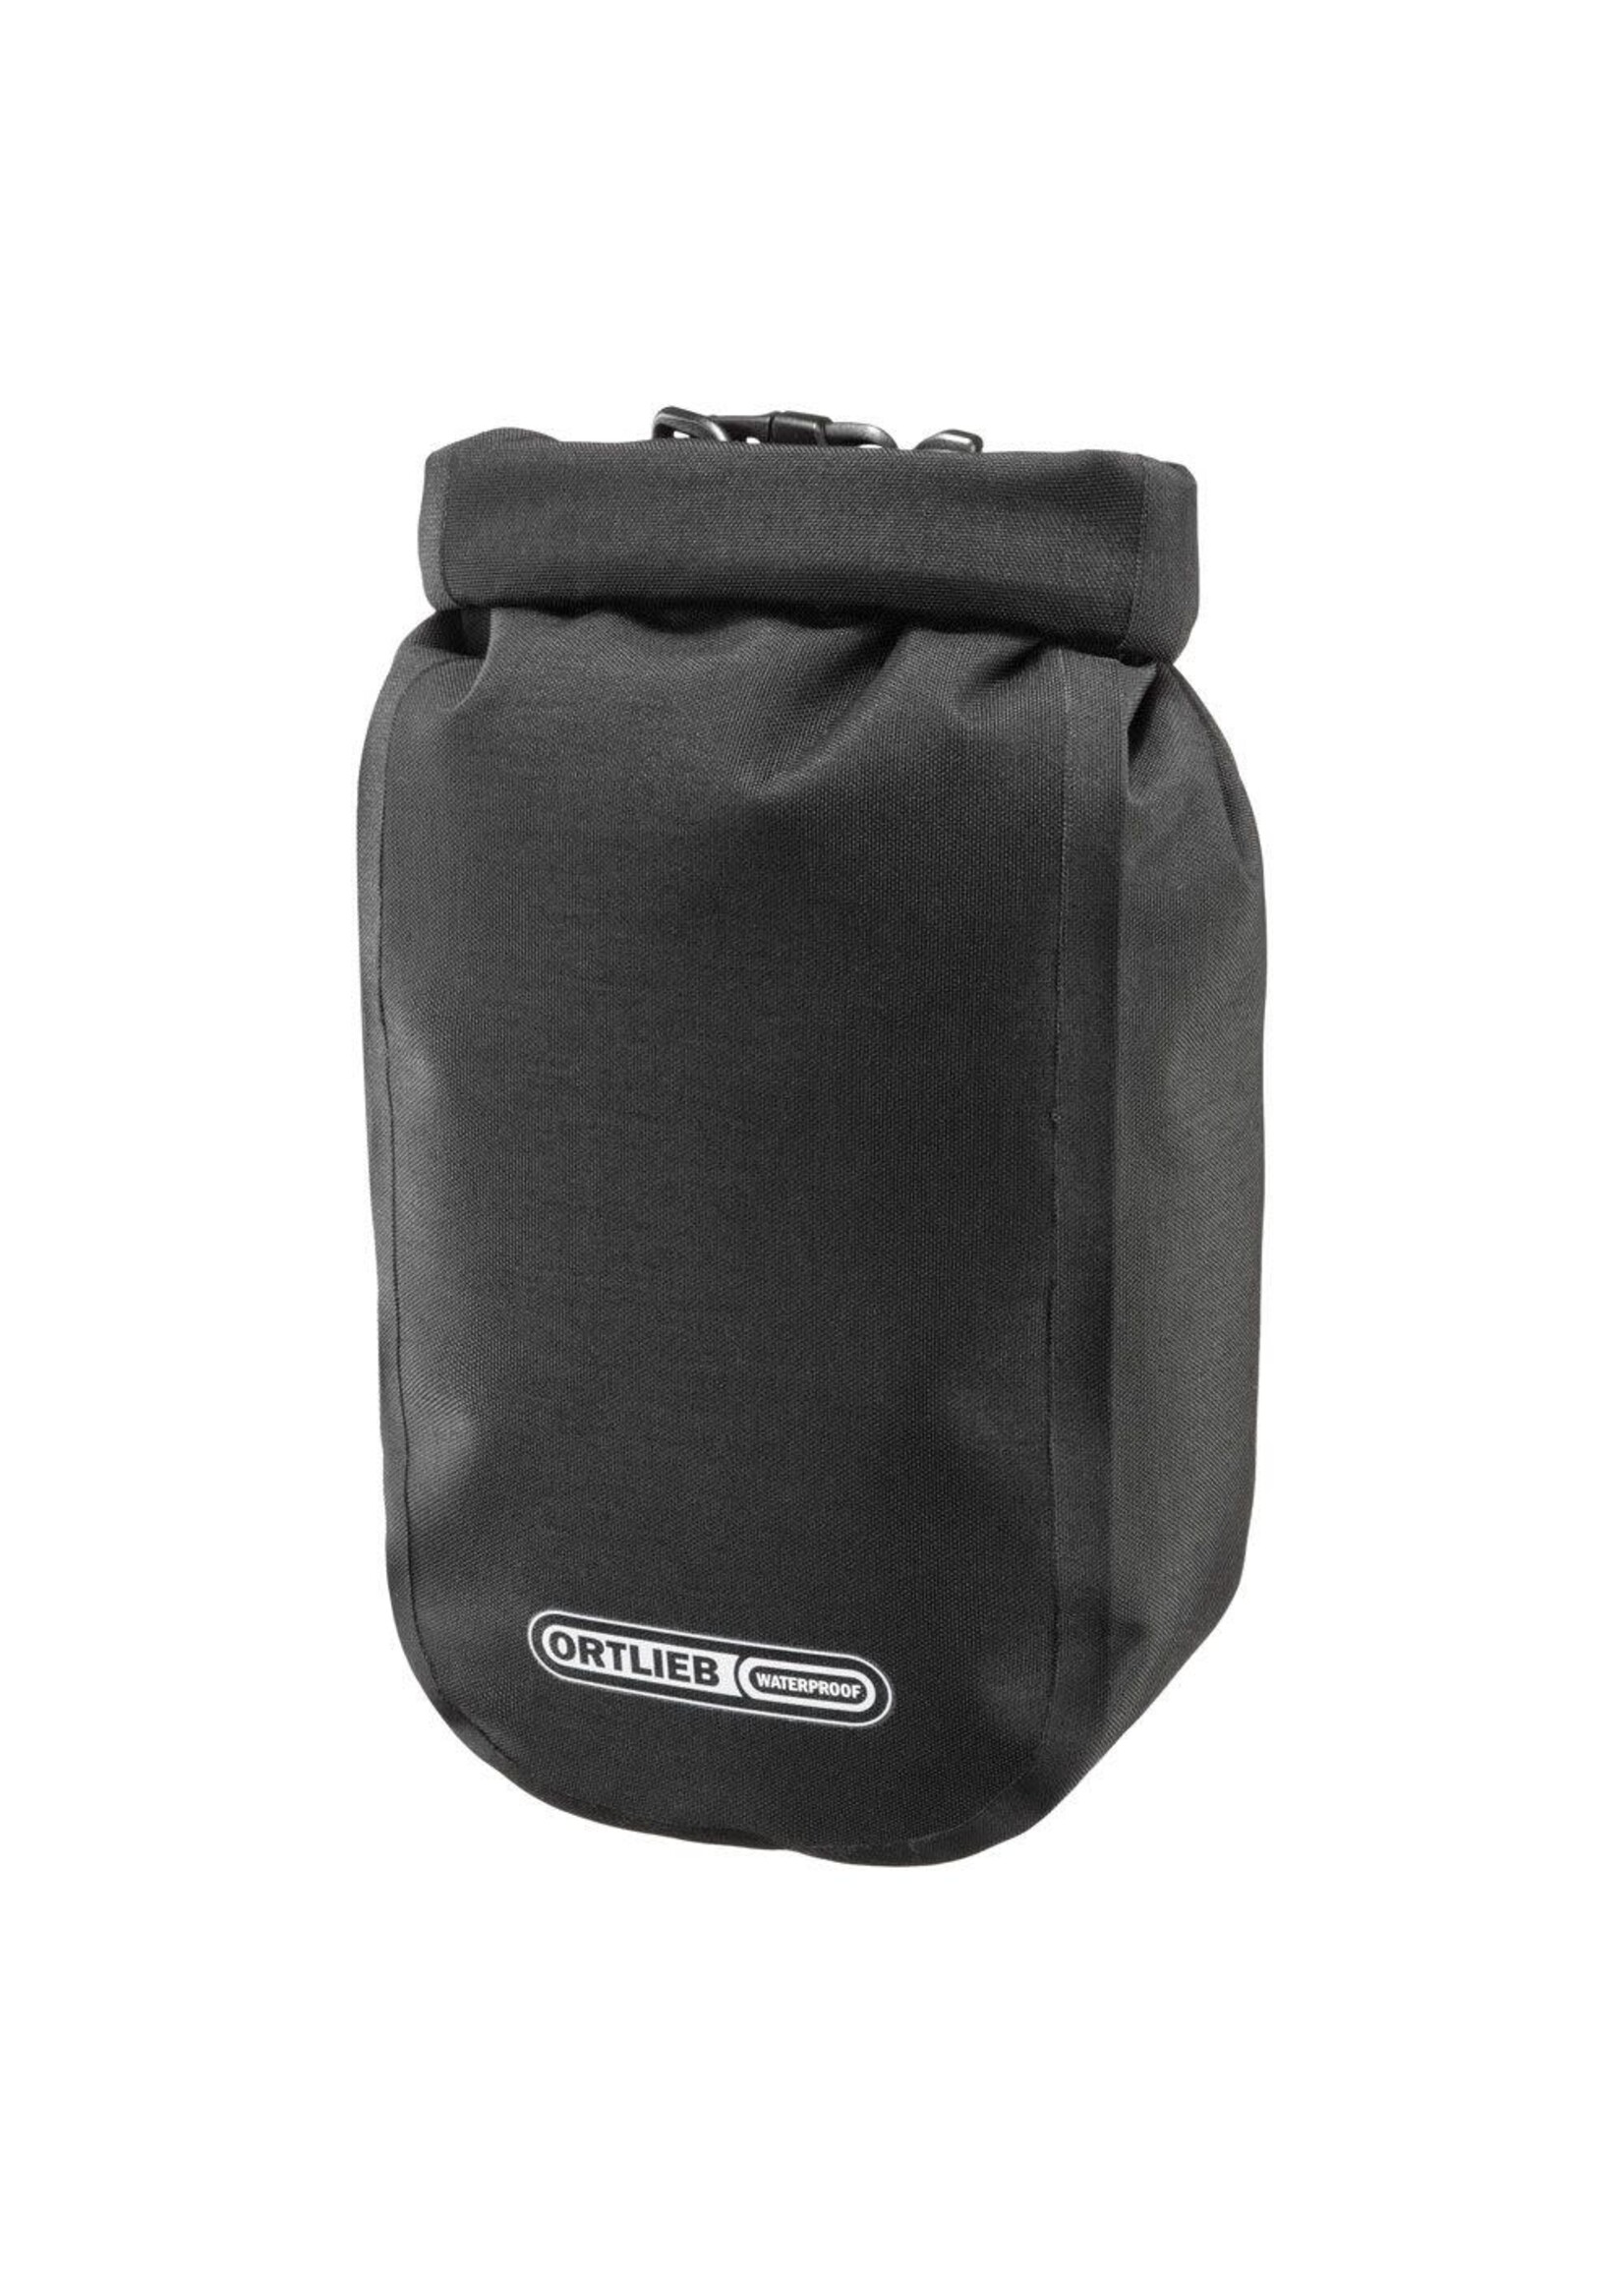 Ortlieb ORTLIEB ACCESSORY PANNIER OUTER POCKET BLACK L